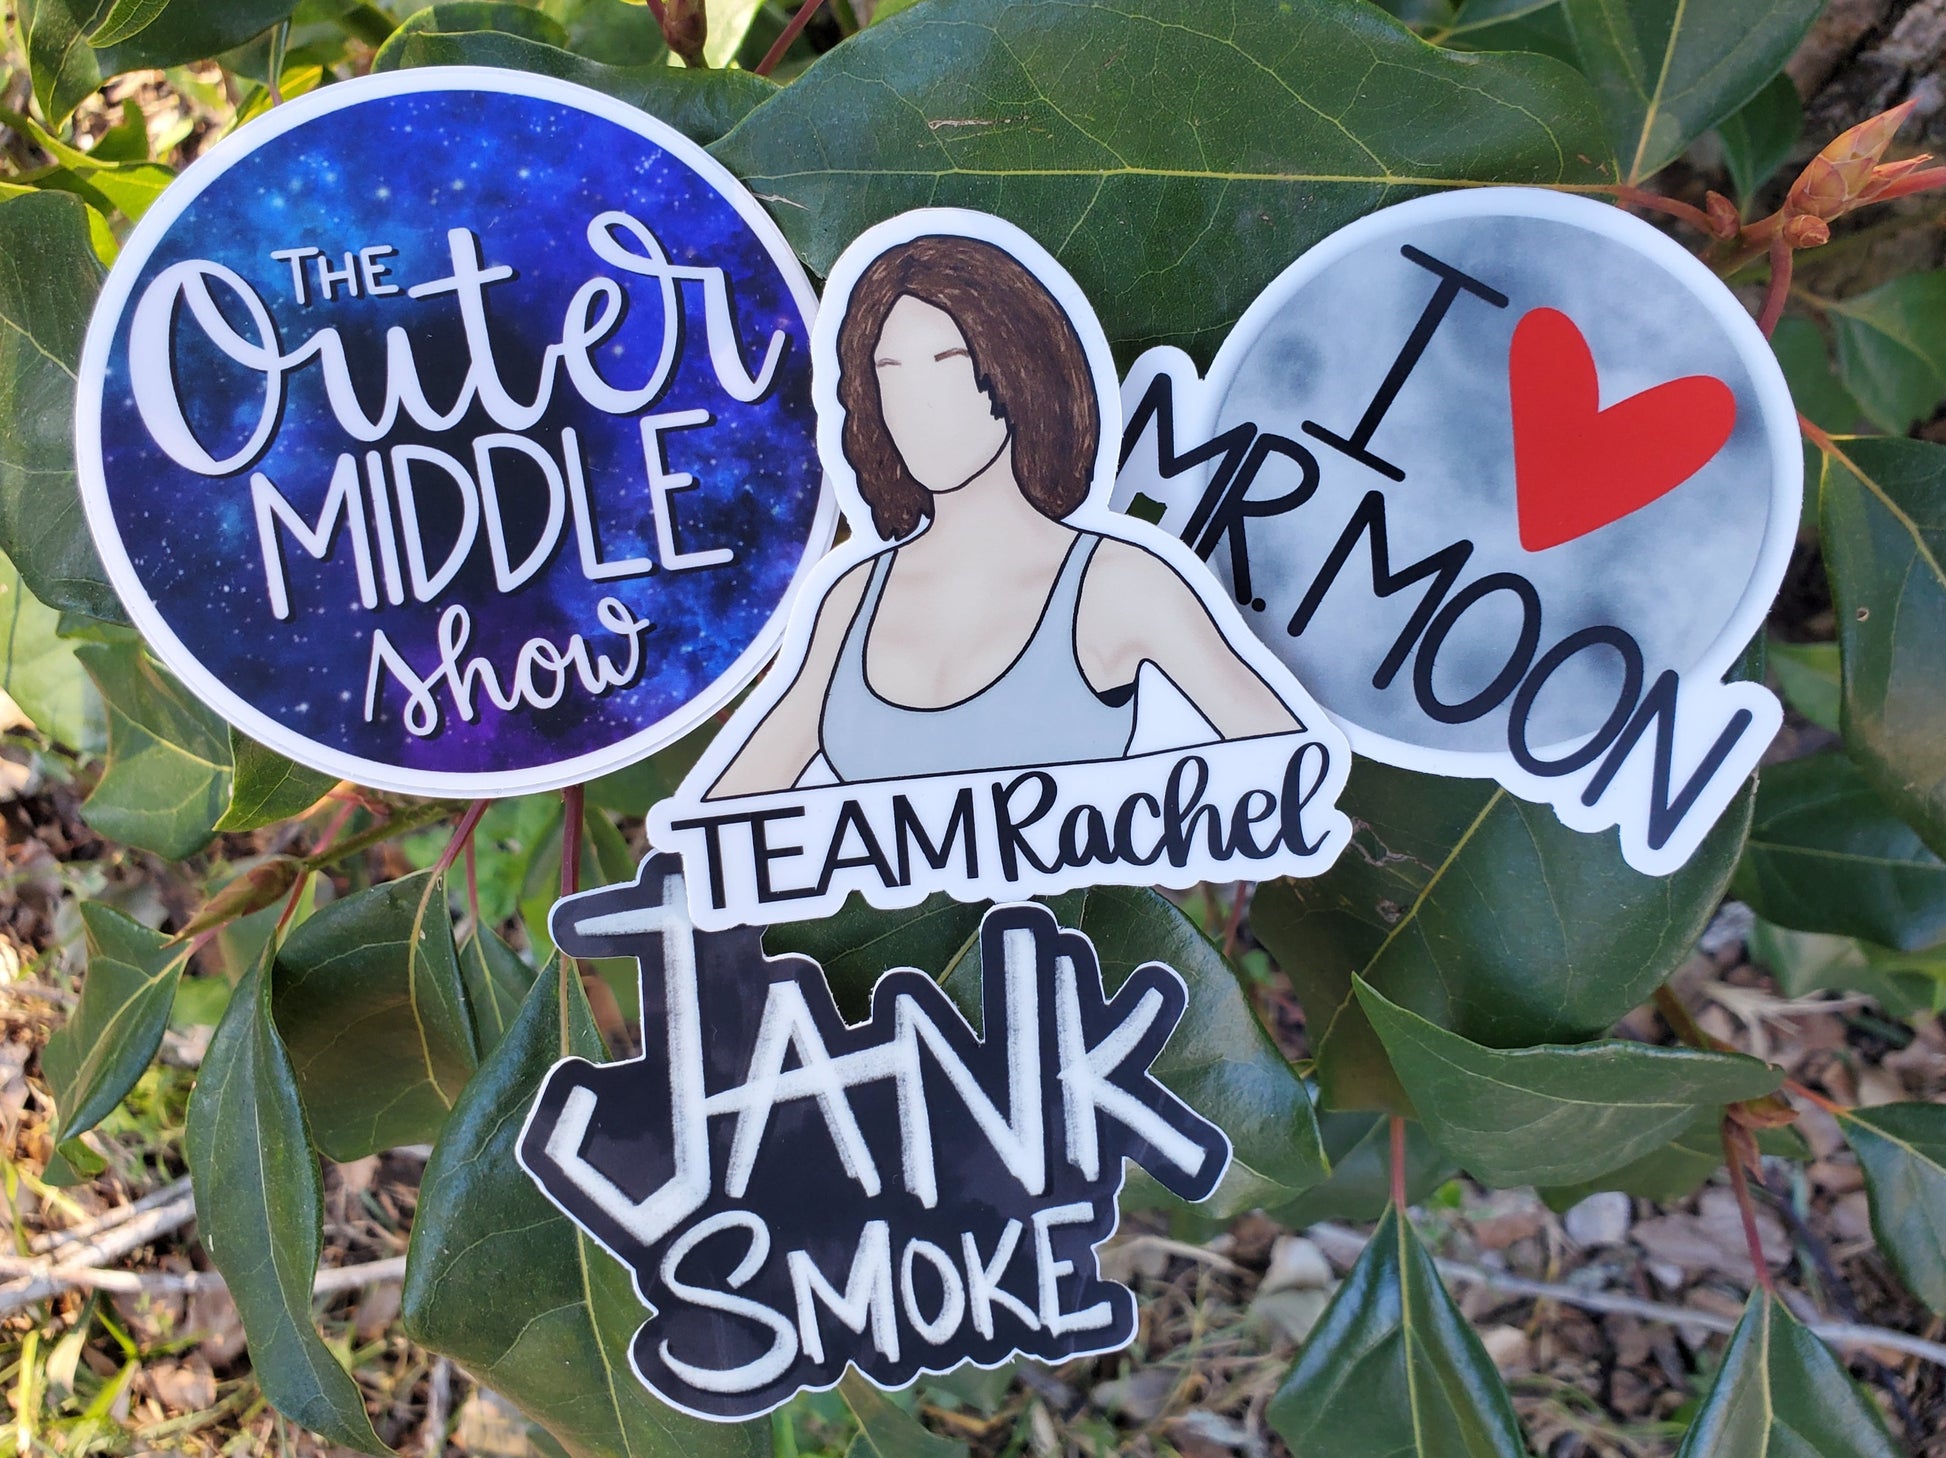 Madd Vladd sticker set. Round the outer middle show sticker with galaxy background. I heart Mr. Moon sticker with the moon as a background. Team Rachel sticker with drawing of Rachel's character in The Mist Survival. Jank Smoke text on black smokey background.